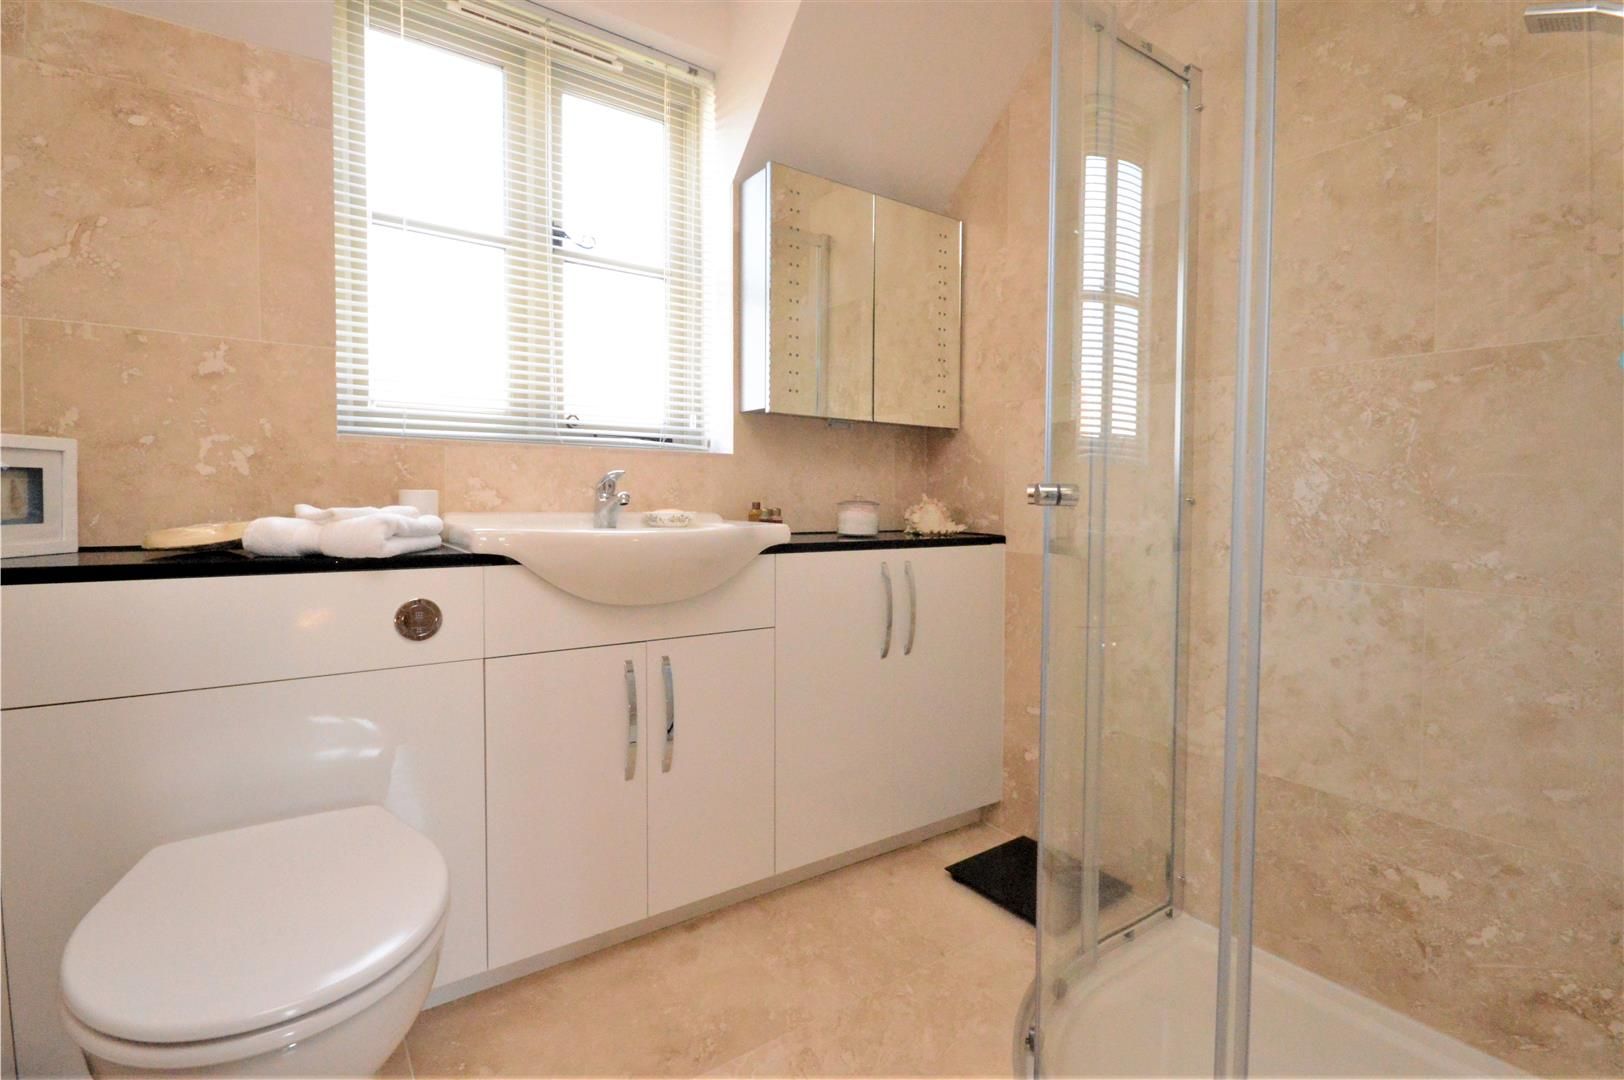 3 bed detached for sale in Winforton 15